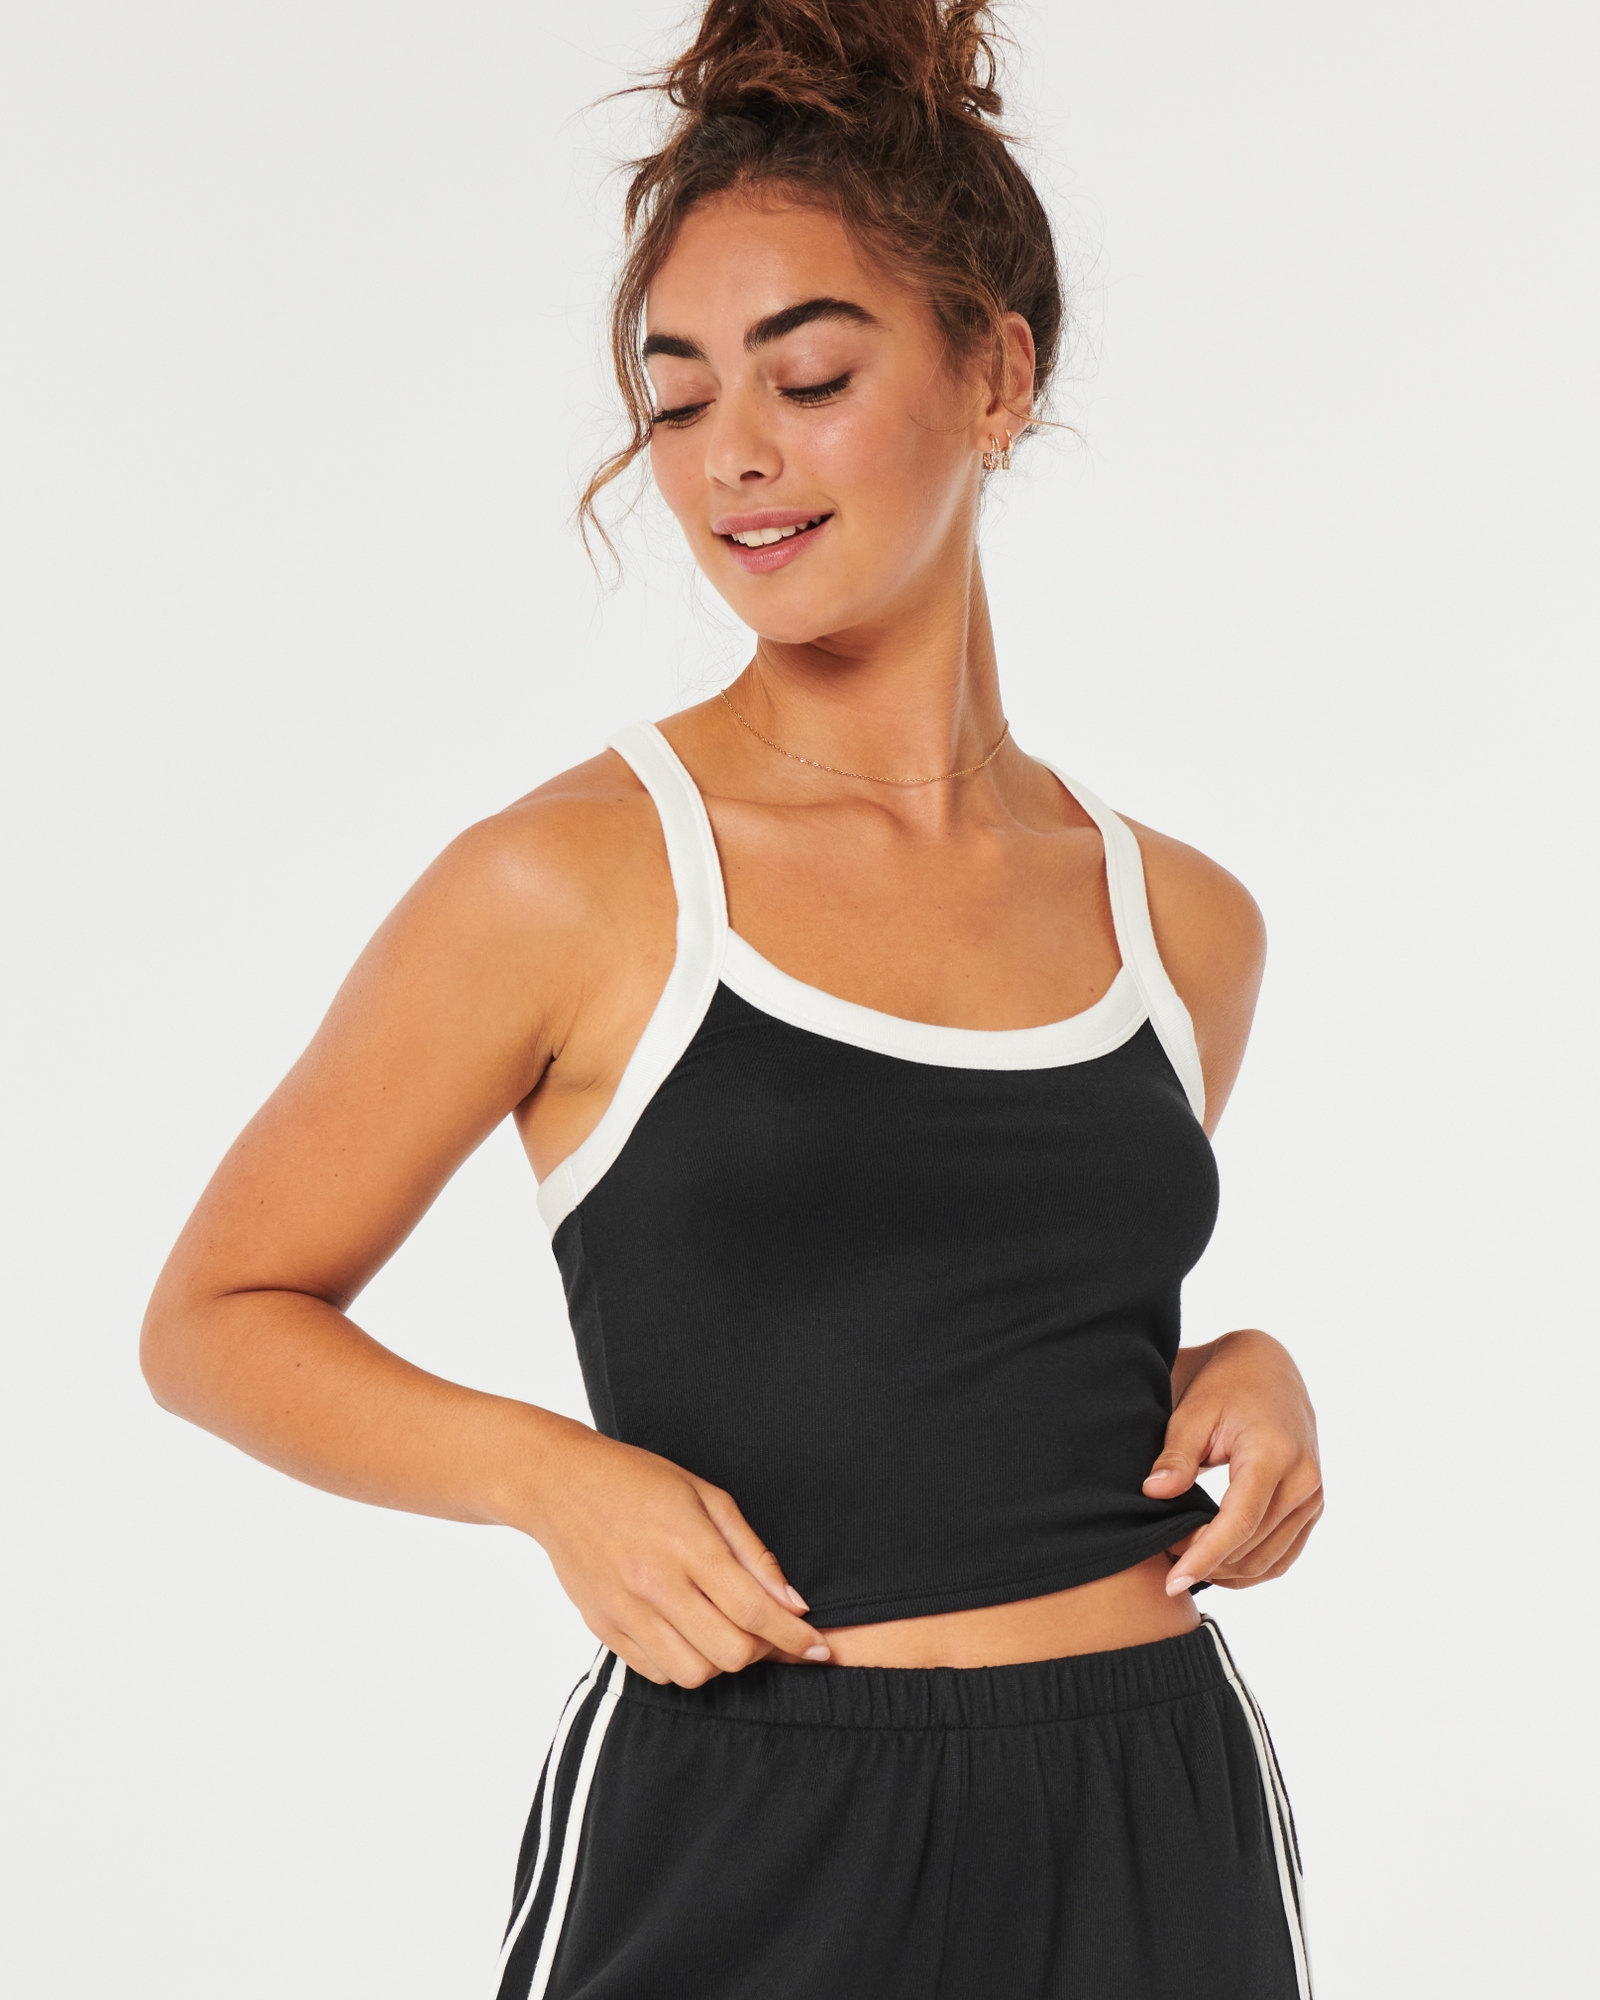 Hollister Co. - Comfy matching sets ft. #GillyHicks bralettes are 100% our  love language. Shop Gilly Hicks